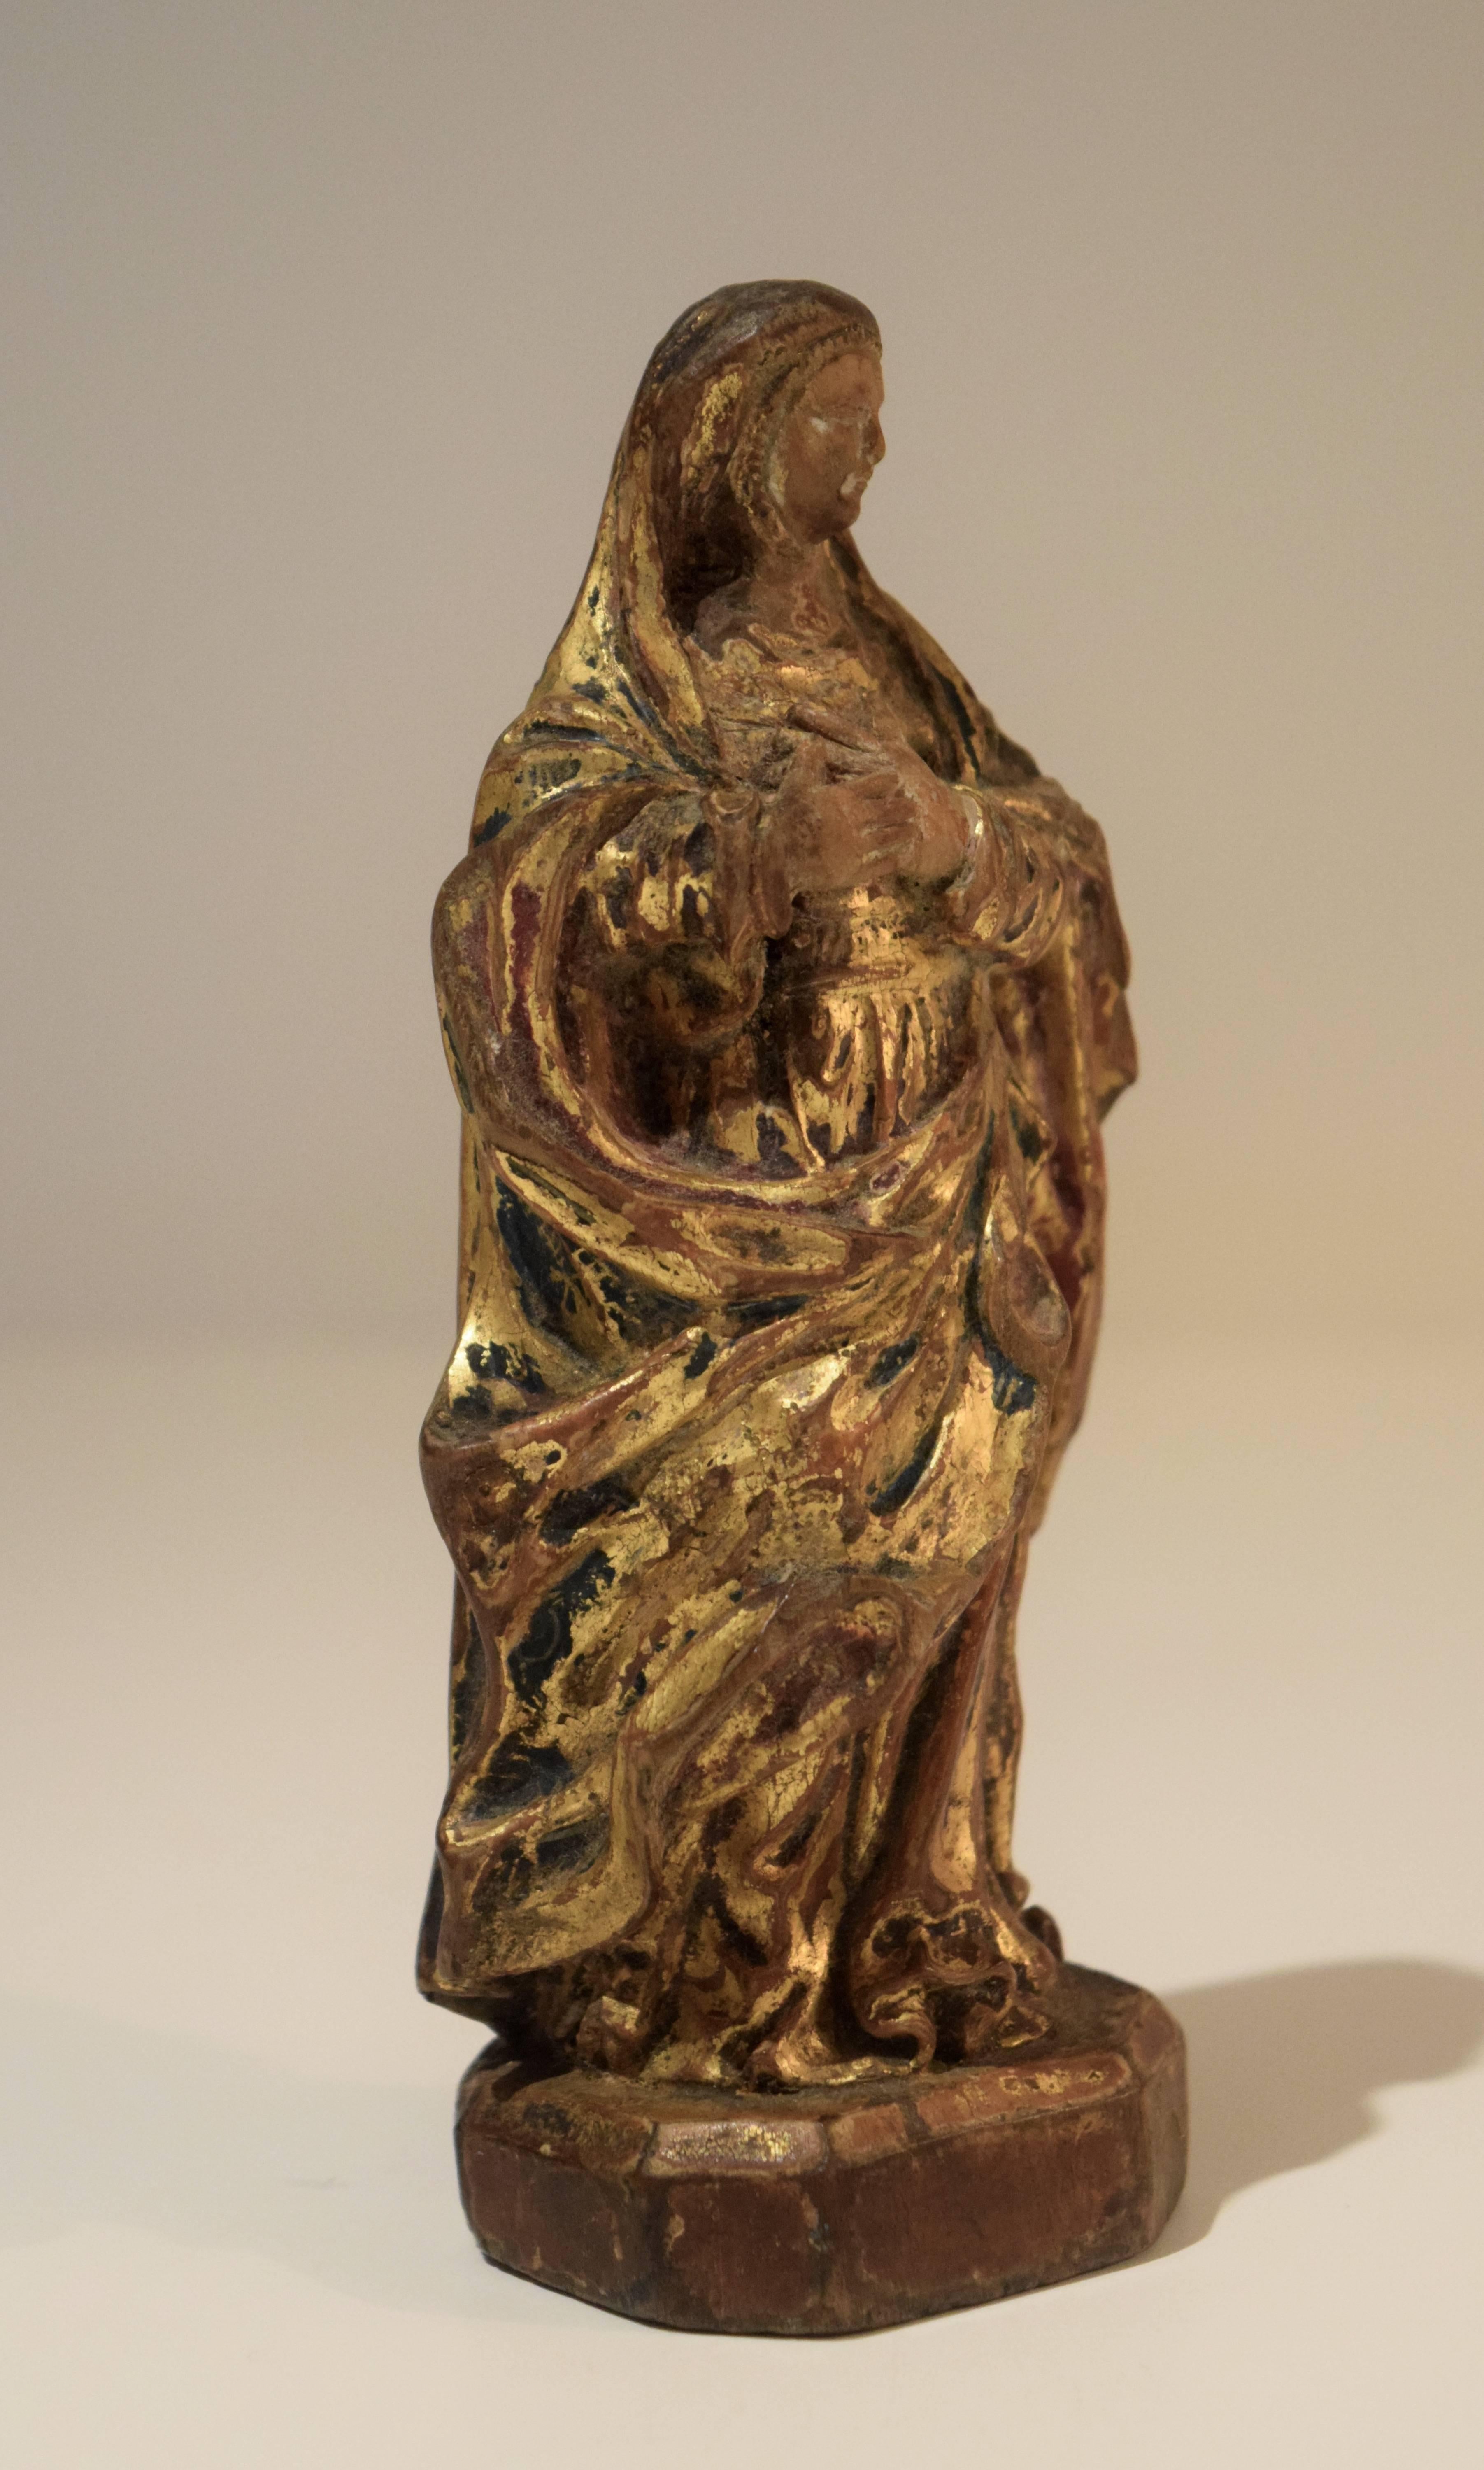 This charming, small, and very fine early 18th-century Flemish sculpture was carved from a single block of walnut. With the exception of the face it was fully gilded prior to painting the lining of the sleeves red, the dress blue, and partially